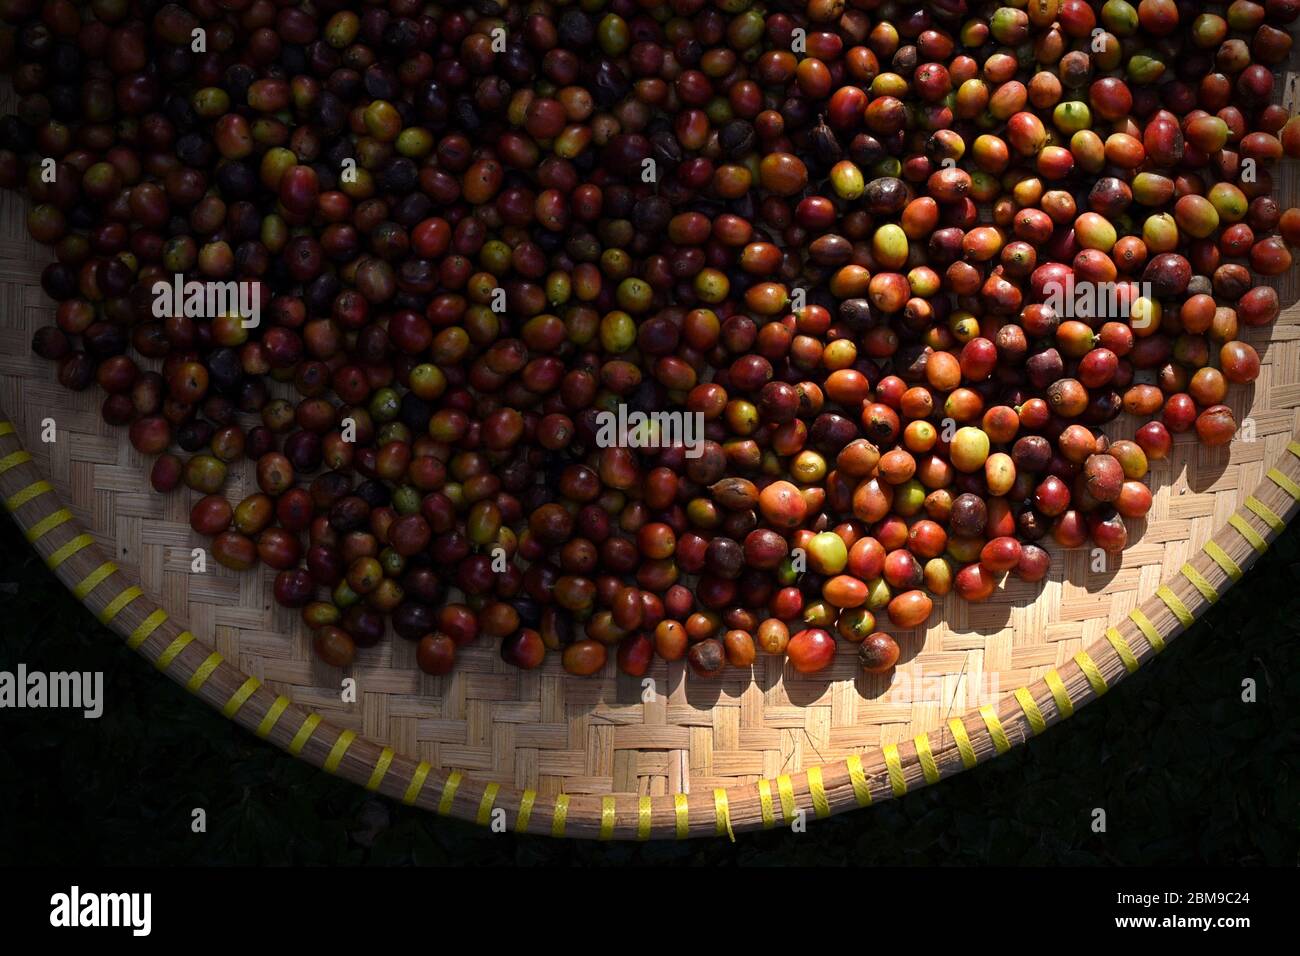 Freshly harvested, hand-picked coffee cherries of Arabica coffee plants in Indonesia. Stock Photo